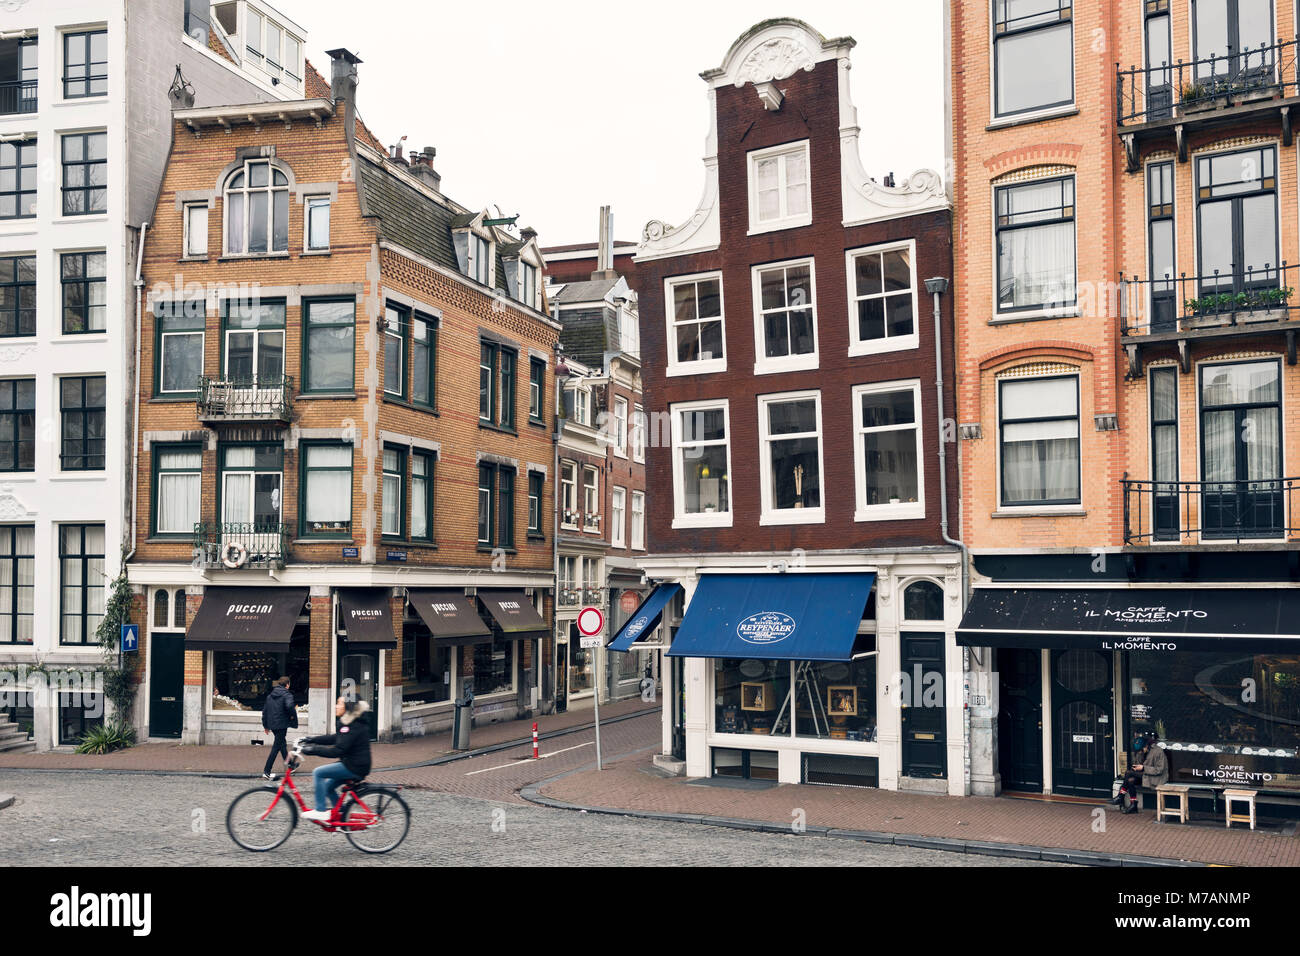 Atmospheric city view of Amsterdam in the Netherlands Stock Photo